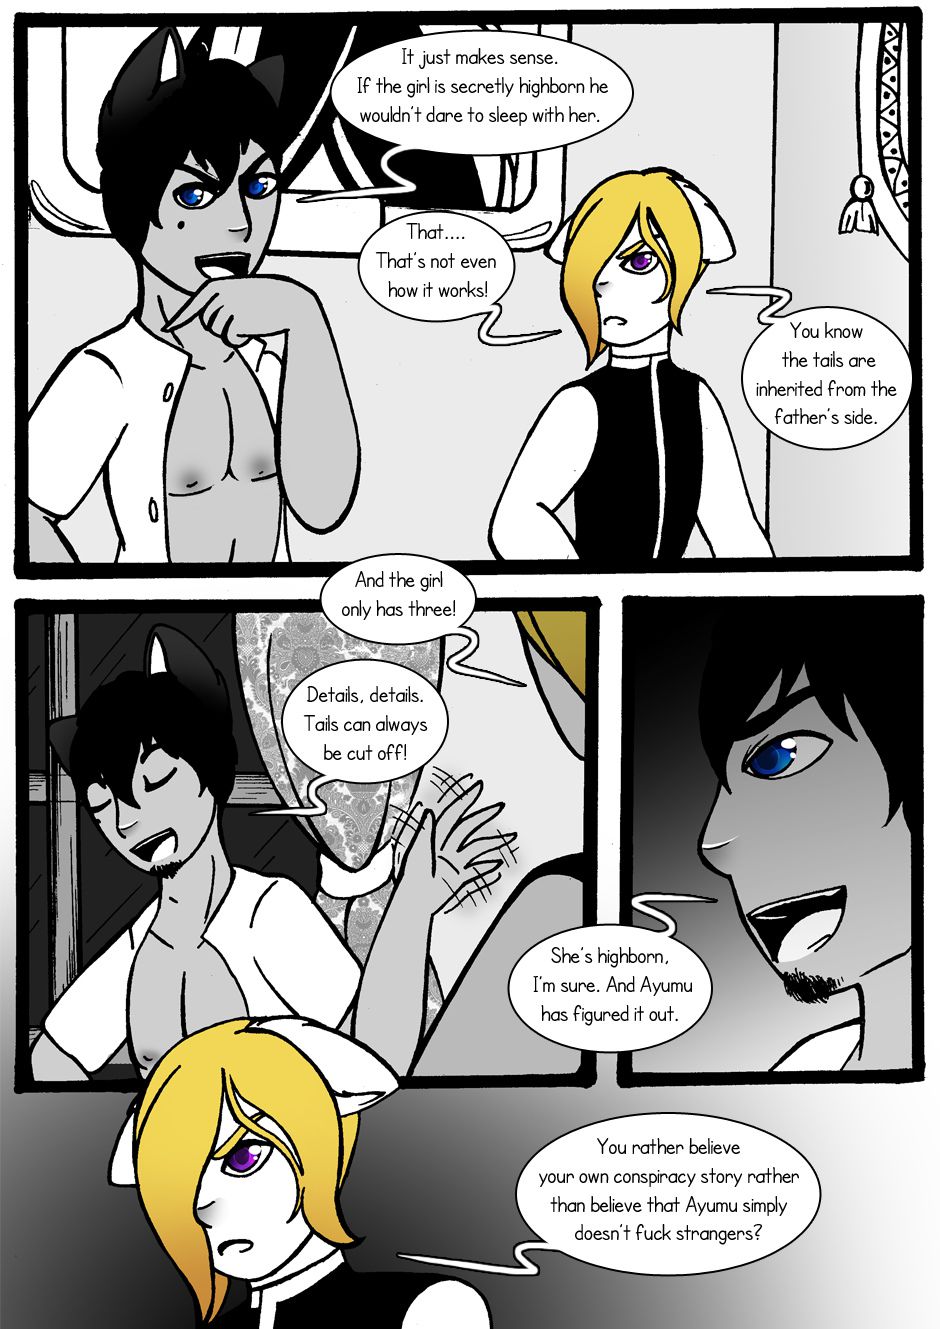 [Jeny-jen94] Between Kings and Queens [Ongoing] 64